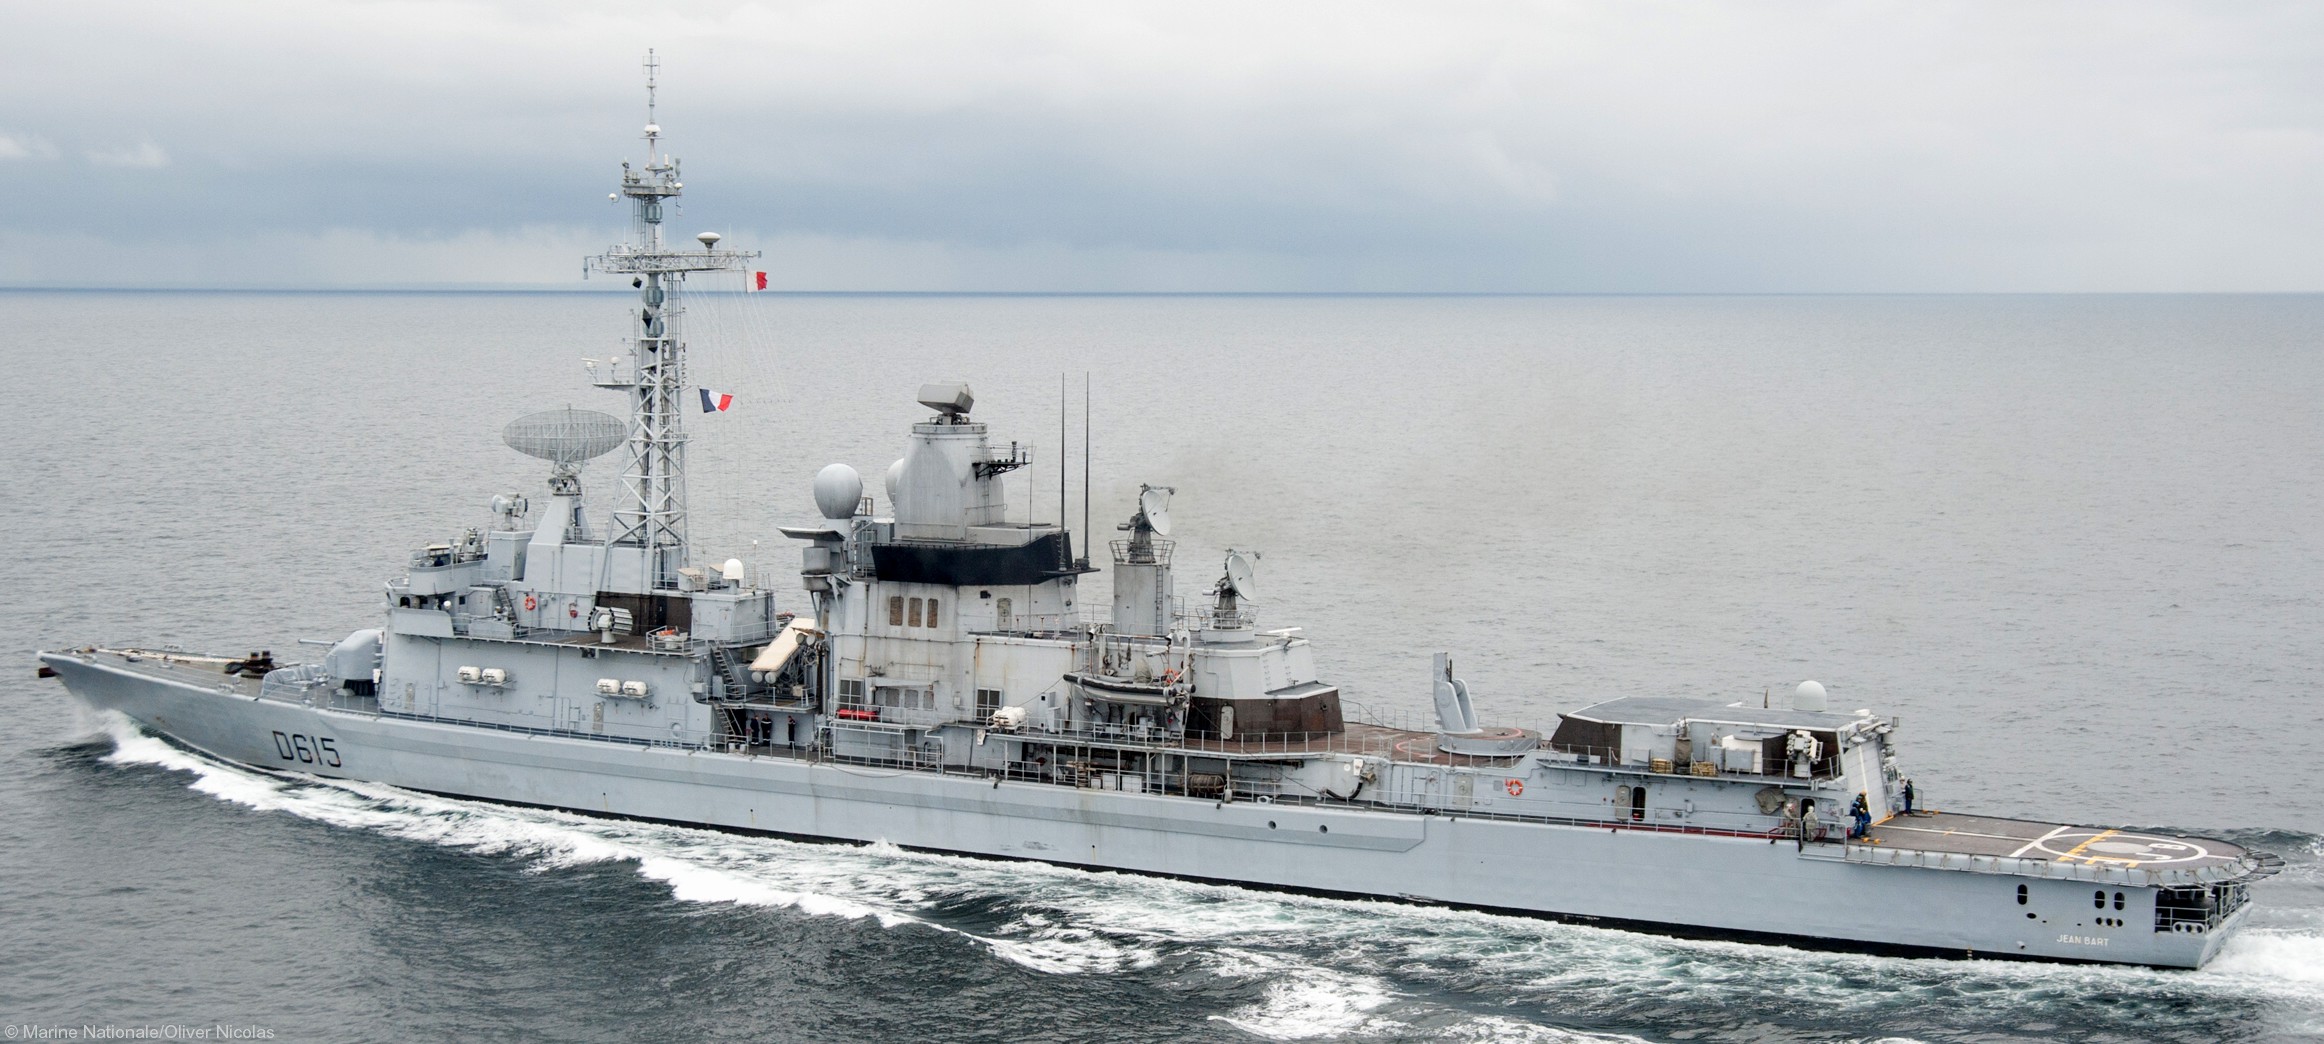 d-615 fs jean bart cassard f70aa class guided missile frigate ffgh ddg french navy marine nationale 15